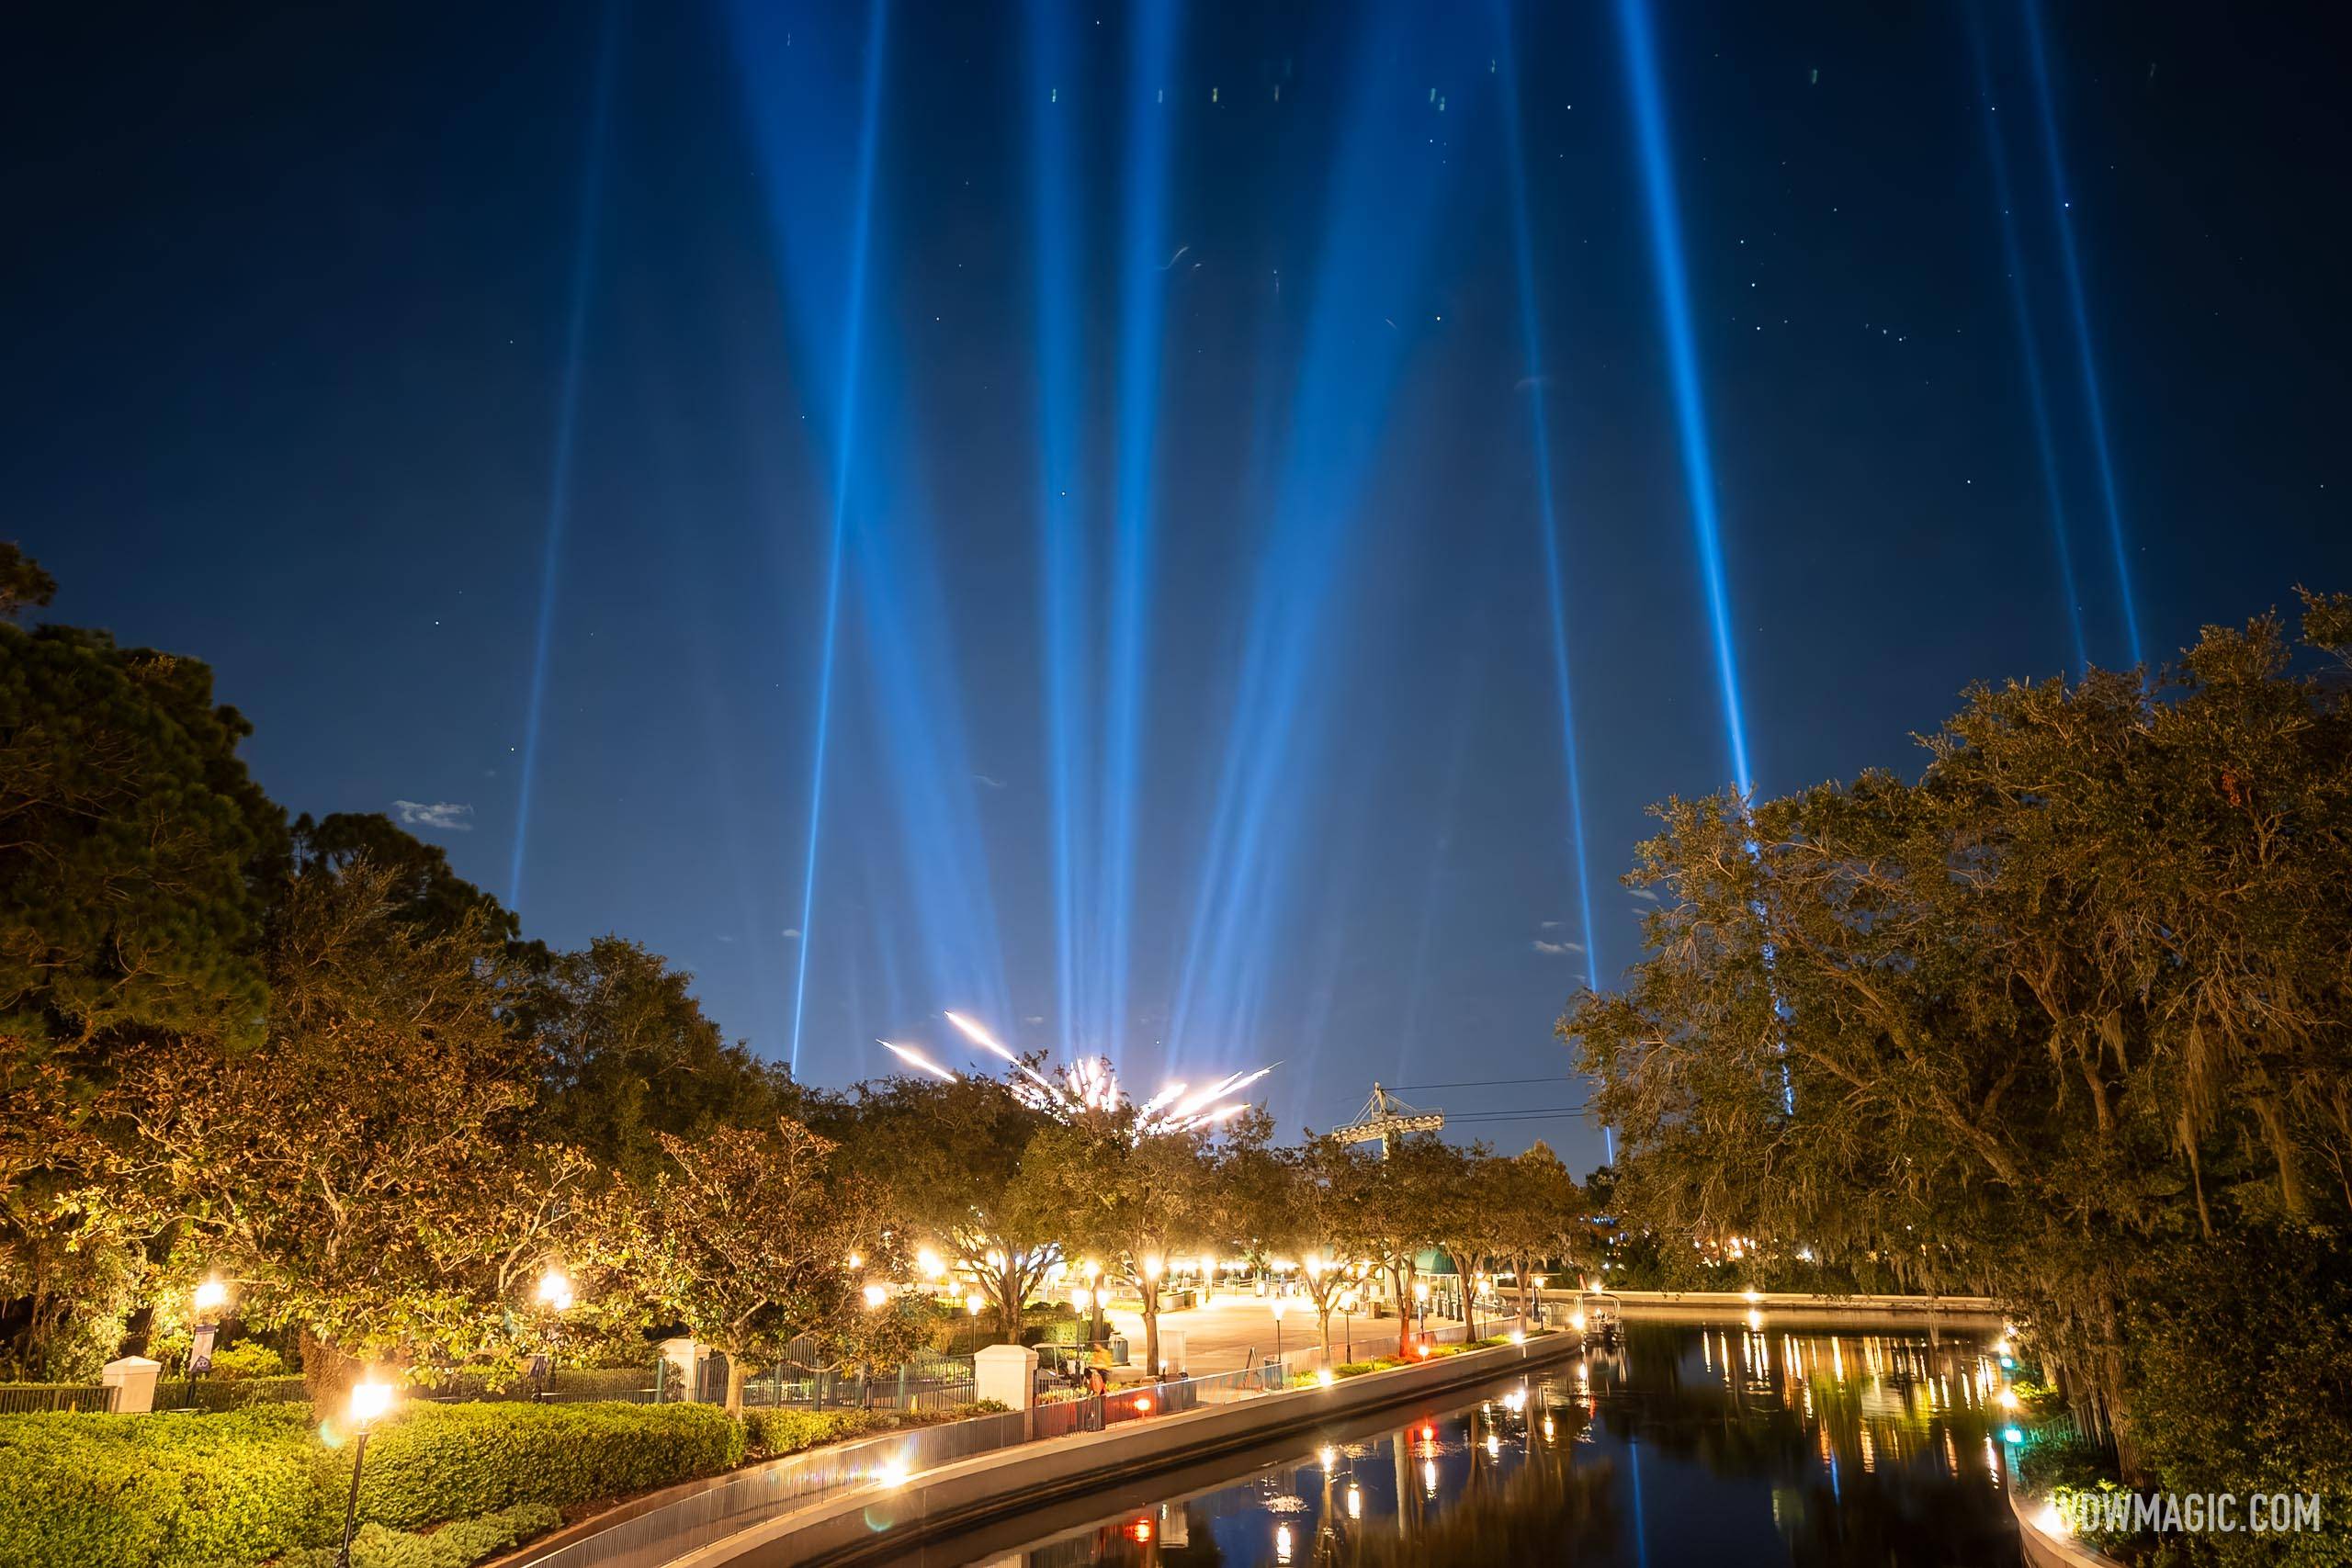 Behind the scenes video of creating Luminous the Symphony of Us at EPCOT